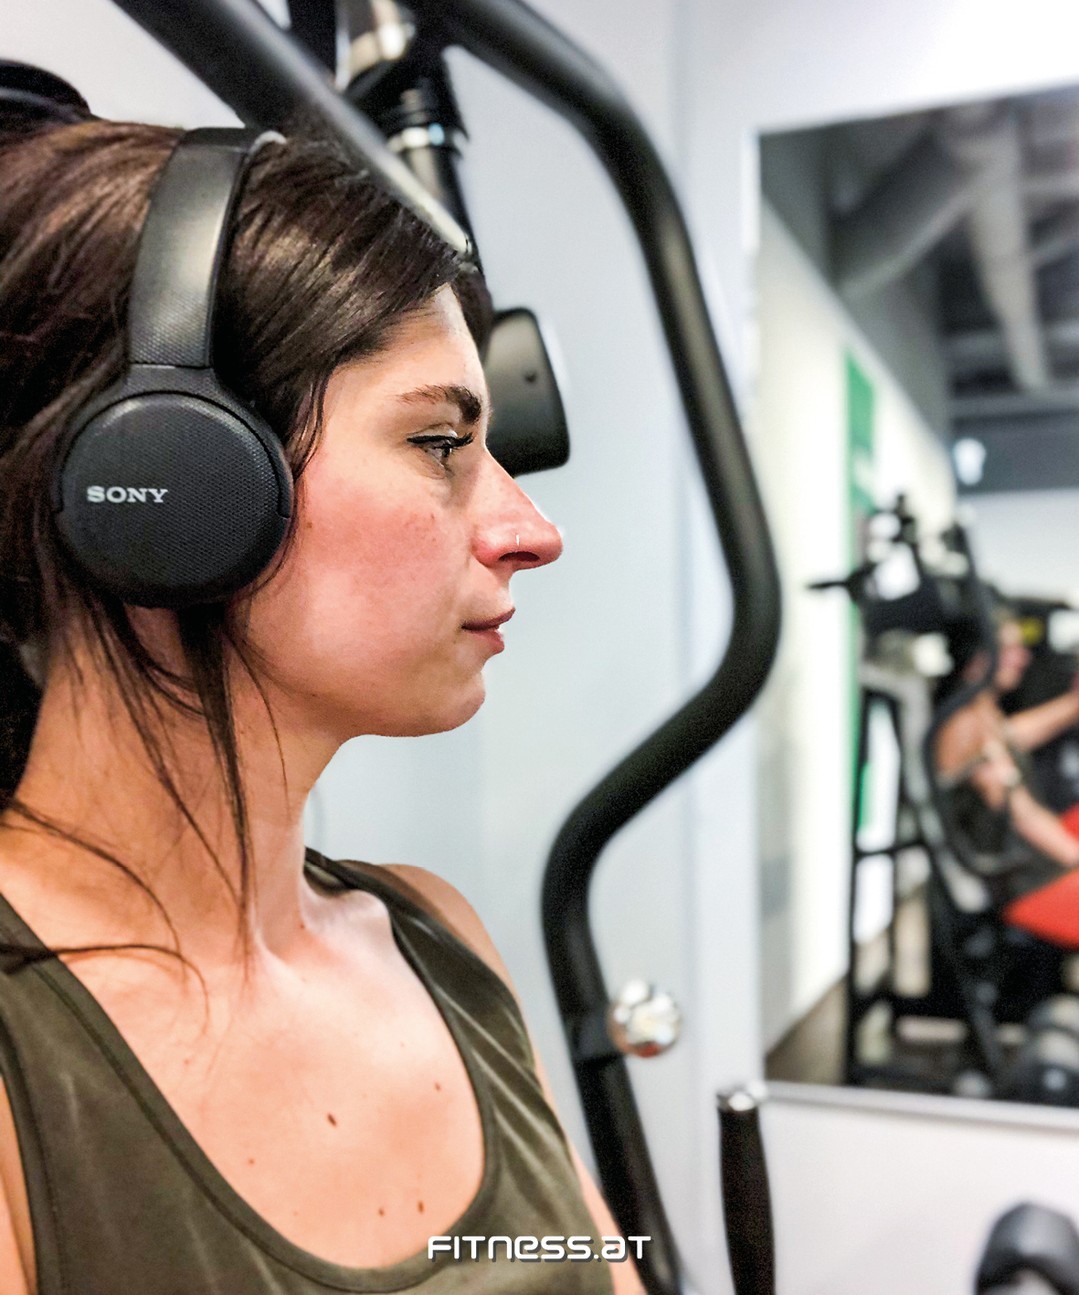 World of 🌎
Music and Training on 🎧💪

📷 @aldina.now
📍 @fit.fabrik

#fitnessat #weilwirfitnessleben #feelit #beautiful #moments #fitnessstudio #fitnessclub #music #musik #fitness #stayfit #feelgood #youcan #bestrong #strong